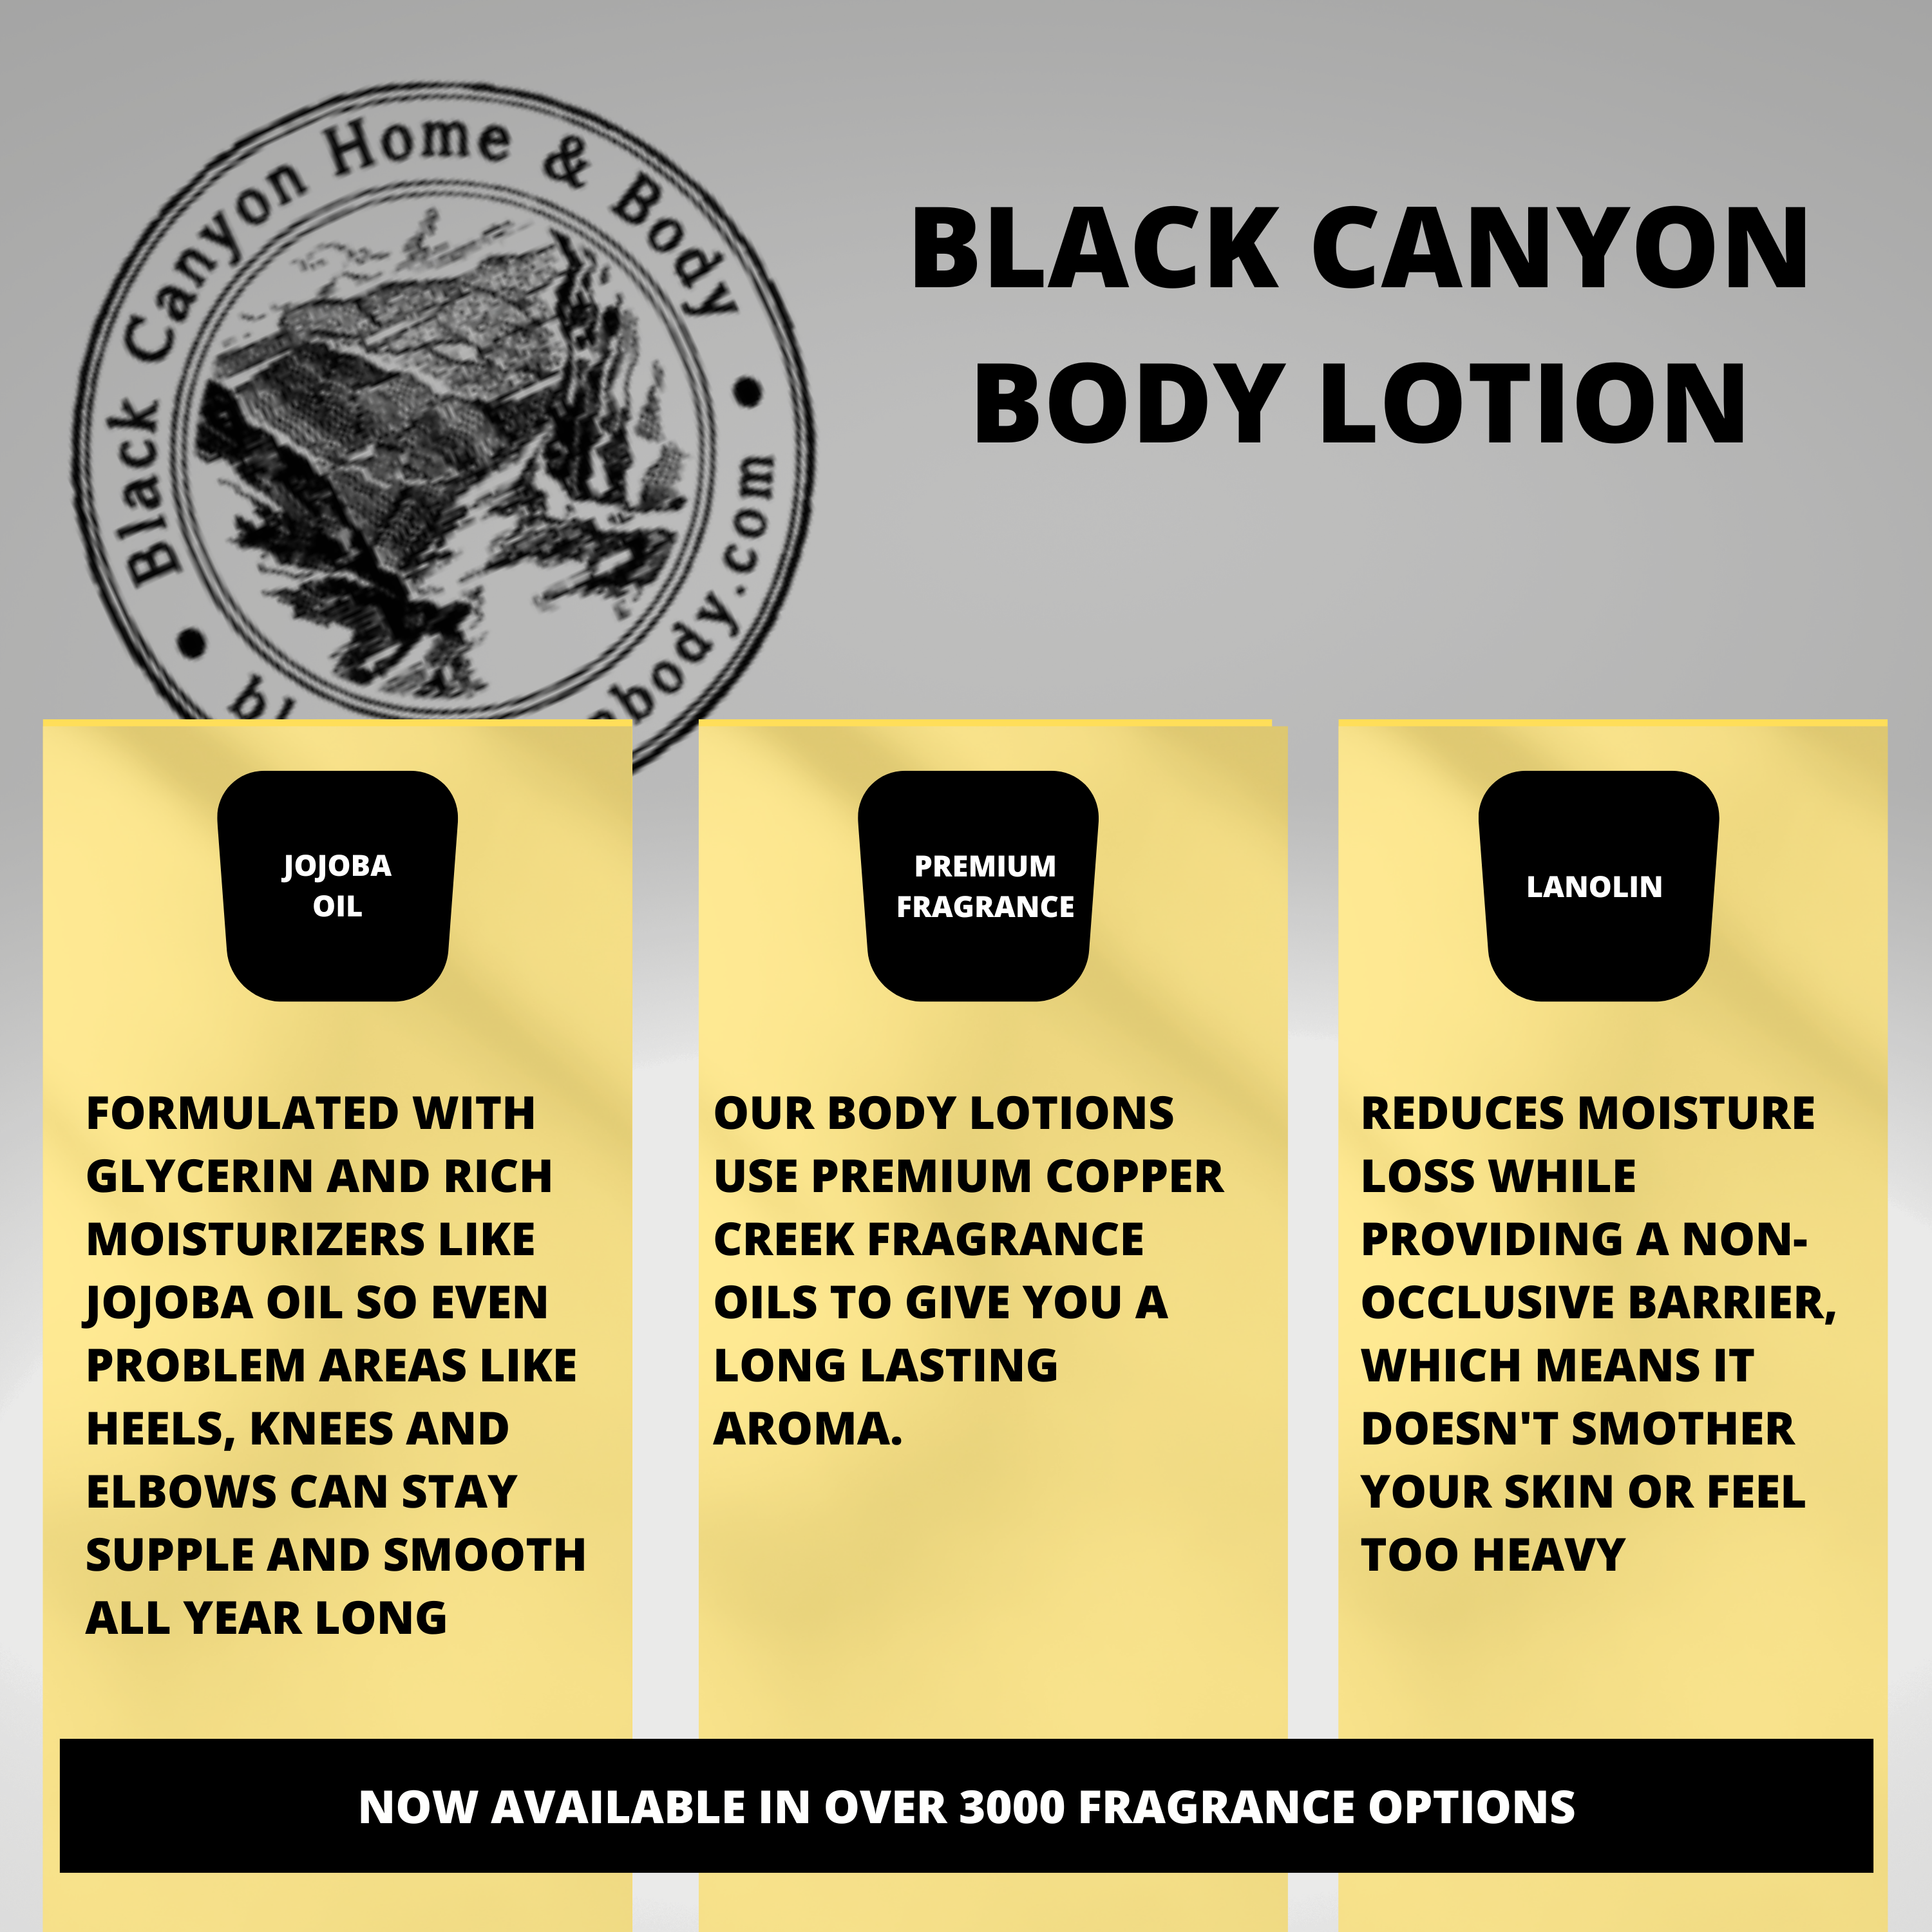 Black Canyon Graham Cracker Scented Luxury Body Lotion with Lanolin and Jojoba Oil